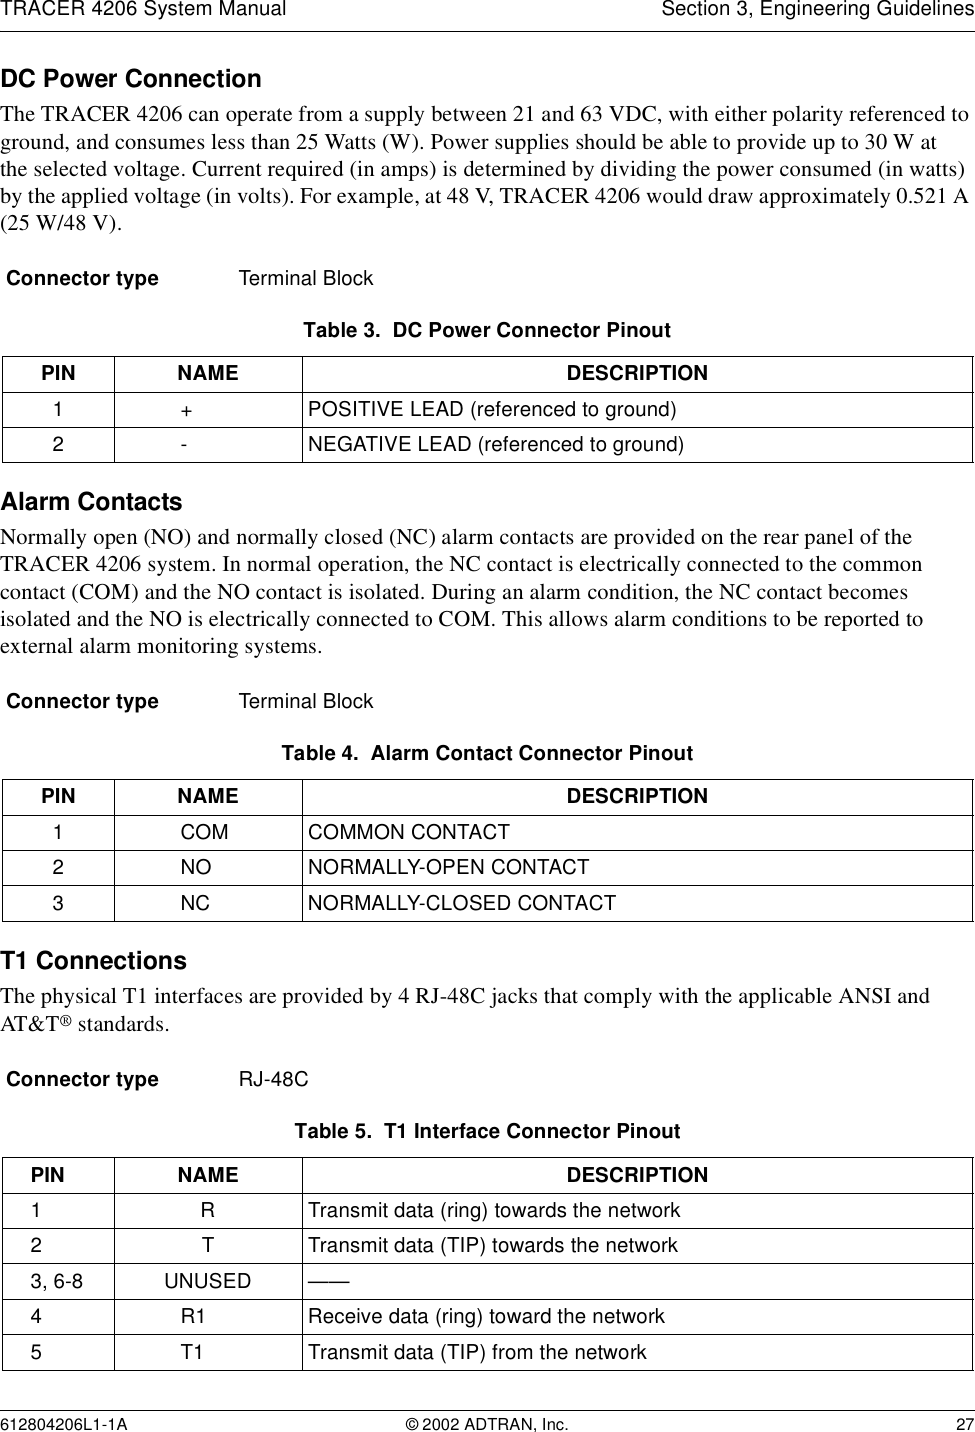 TRACER 4206 System Manual Section 3, Engineering Guidelines612804206L1-1A © 2002 ADTRAN, Inc. 27DC Power ConnectionThe TRACER 4206 can operate from a supply between 21 and 63 VDC, with either polarity referenced to ground, and consumes less than 25 Watts (W). Power supplies should be able to provide up to 30 W atthe selected voltage. Current required (in amps) is determined by dividing the power consumed (in watts) by the applied voltage (in volts). For example, at 48 V, TRACER 4206 would draw approximately 0.521 A (25 W/48 V).Alarm ContactsNormally open (NO) and normally closed (NC) alarm contacts are provided on the rear panel of the TRACER 4206 system. In normal operation, the NC contact is electrically connected to the common contact (COM) and the NO contact is isolated. During an alarm condition, the NC contact becomes isolated and the NO is electrically connected to COM. This allows alarm conditions to be reported to external alarm monitoring systems.T1 ConnectionsThe physical T1 interfaces are provided by 4 RJ-48C jacks that comply with the applicable ANSI and AT&amp;T® standards.Connector type Terminal BlockTable 3.  DC Power Connector PinoutPIN NAME DESCRIPTION1+ POSITIVE LEAD (referenced to ground)2- NEGATIVE LEAD (referenced to ground)Connector type Terminal BlockTable 4.  Alarm Contact Connector PinoutPIN NAME DESCRIPTION1COM COMMON CONTACT2NO NORMALLY-OPEN CONTACT3NC NORMALLY-CLOSED CONTACTConnector type RJ-48CTable 5.  T1 Interface Connector PinoutPIN NAME DESCRIPTION1 R Transmit data (ring) towards the network2 T Transmit data (TIP) towards the network3, 6-8 UNUSED ——4R1 Receive data (ring) toward the network5T1 Transmit data (TIP) from the network